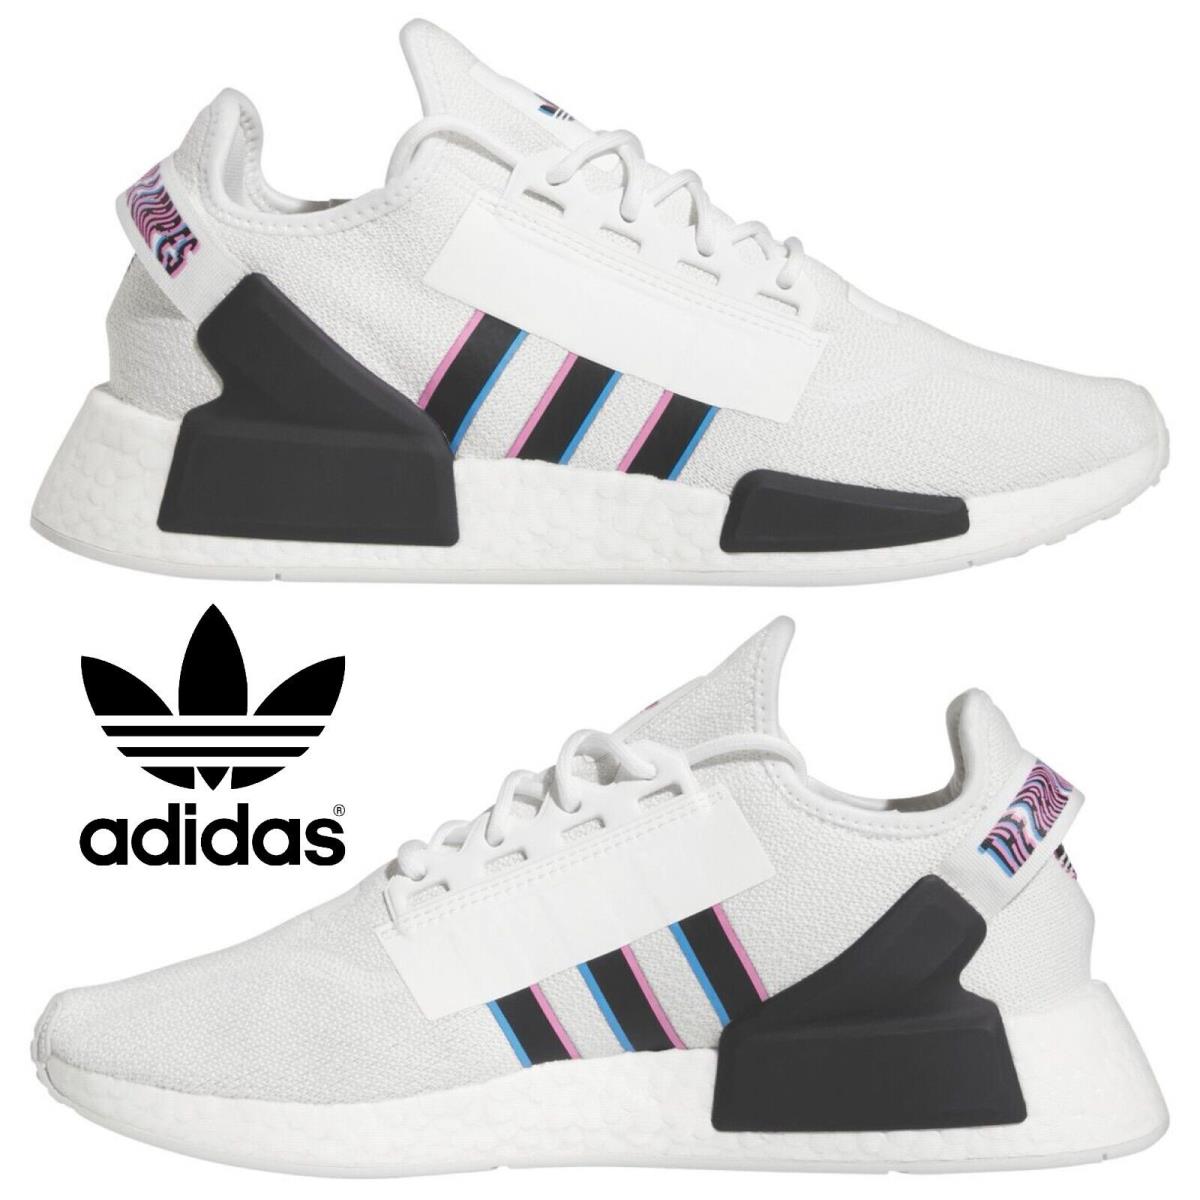 Adidas Originals Nmd R1 Men`s Sneakers Running Shoes Gym Casual Sport White